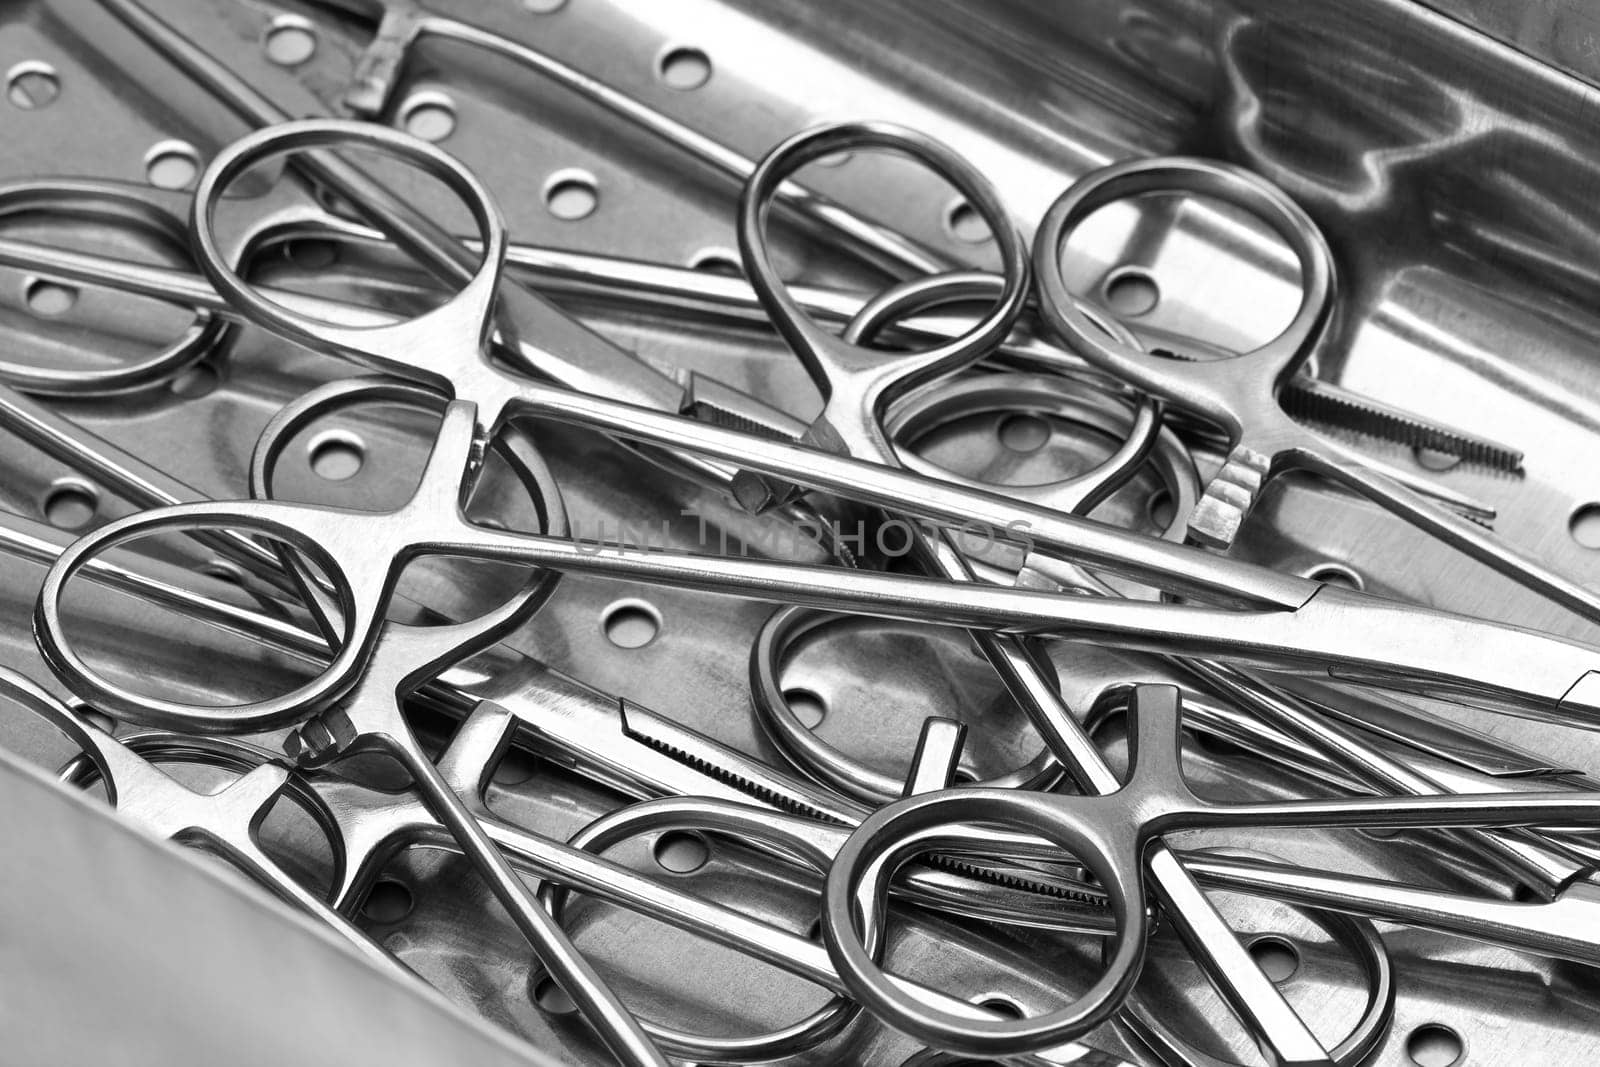 Closeup view stainless surgical needle drivers lying down on steel sterilization tray medical tools by Alexander-Piragis